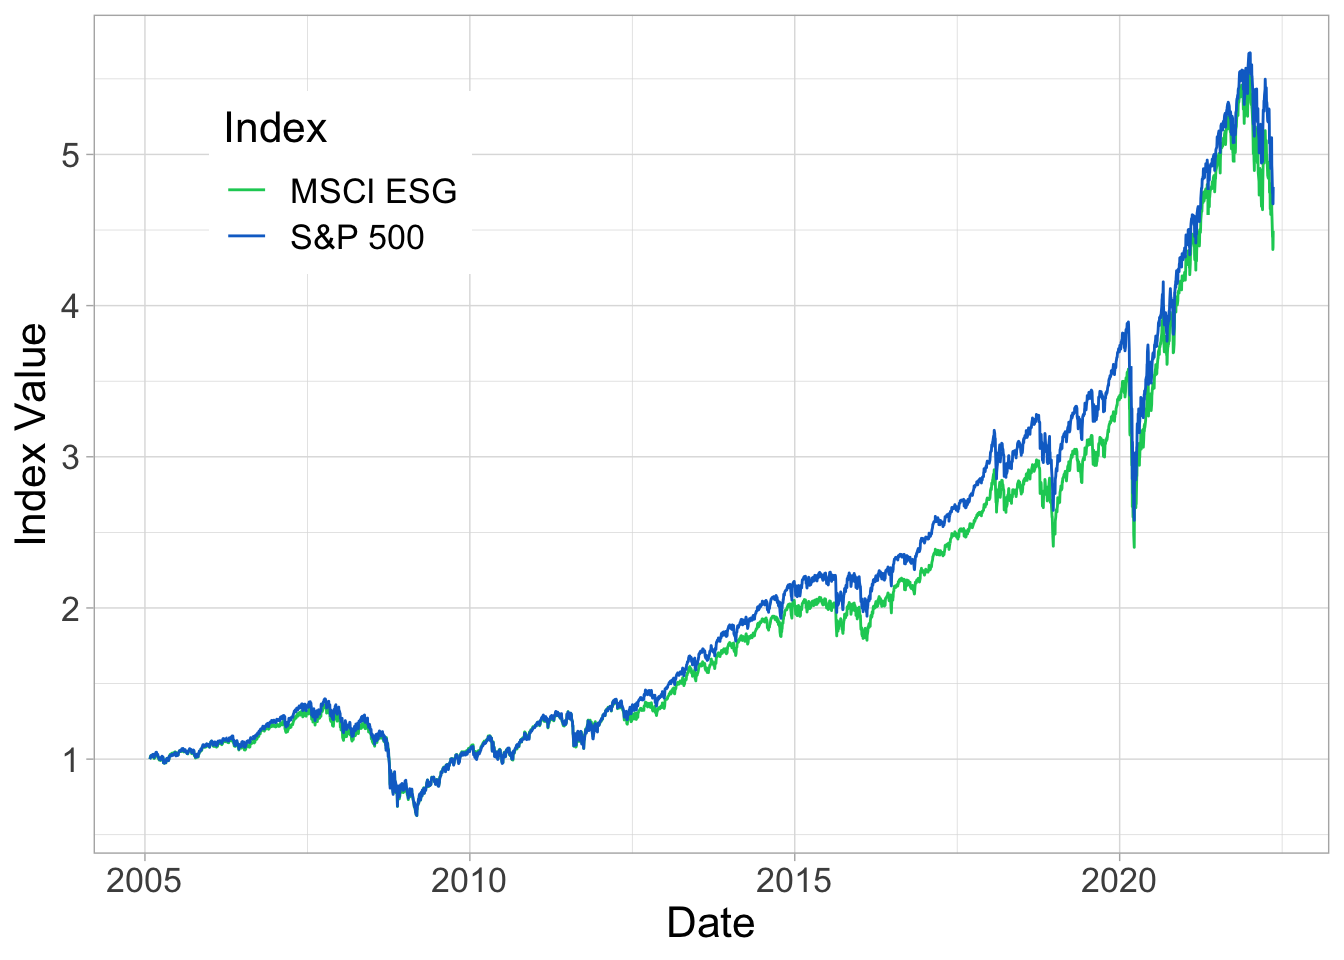 Performance comparison. We plot the index values (S&P 500 and iShares MSCI USA ESG Select ETF), onward from January 28th, 2005 (inception date of the ESG portfolio). The series are normalized so that their initial value is one.